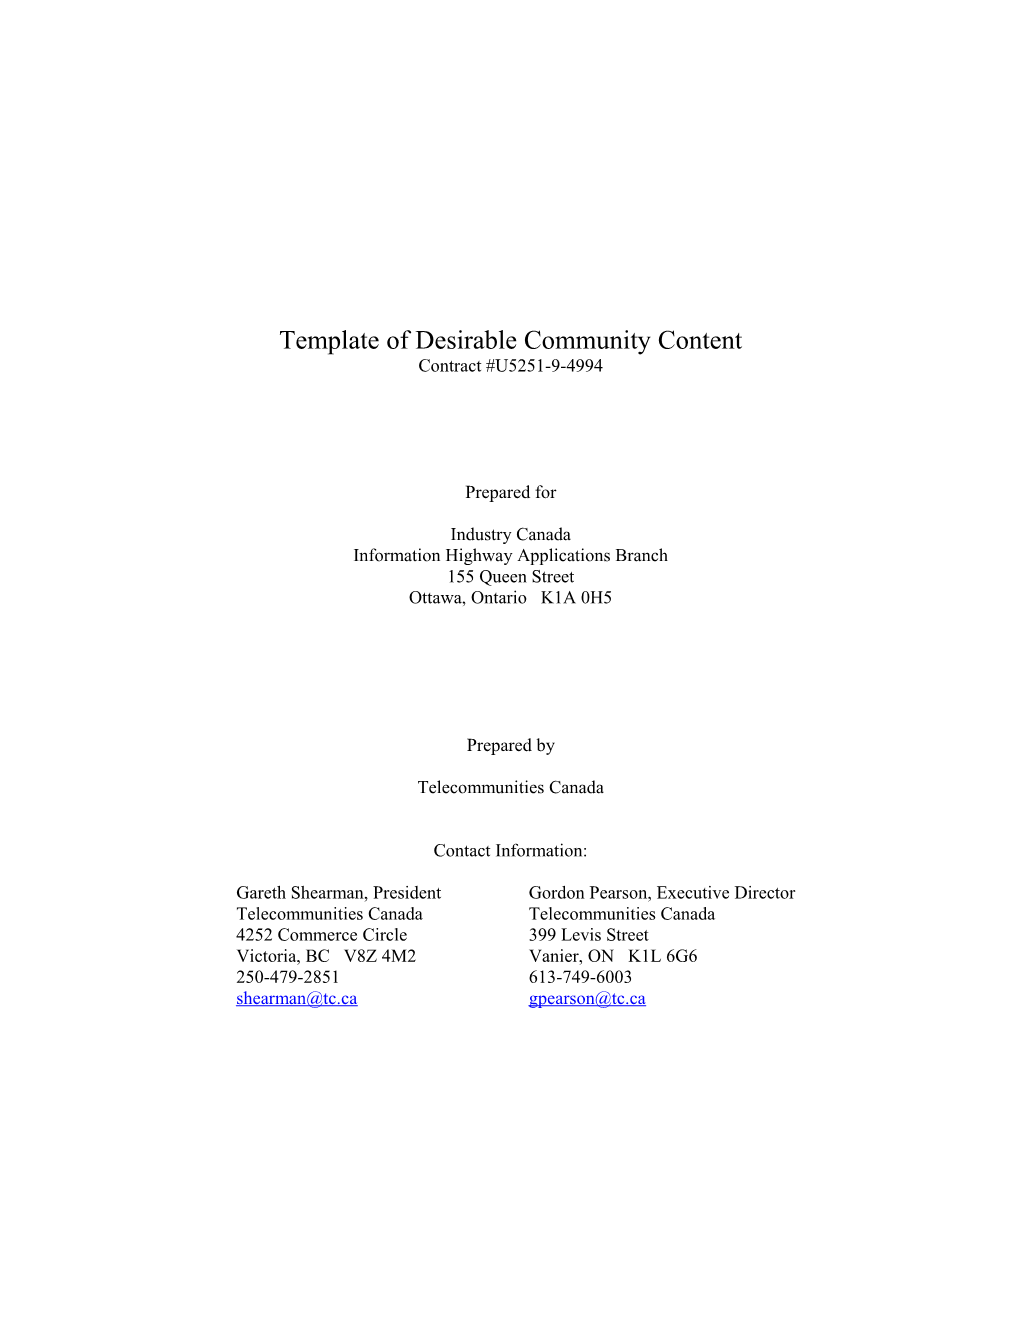 Template of Desirable Community Content Contract #U5251-9-4994